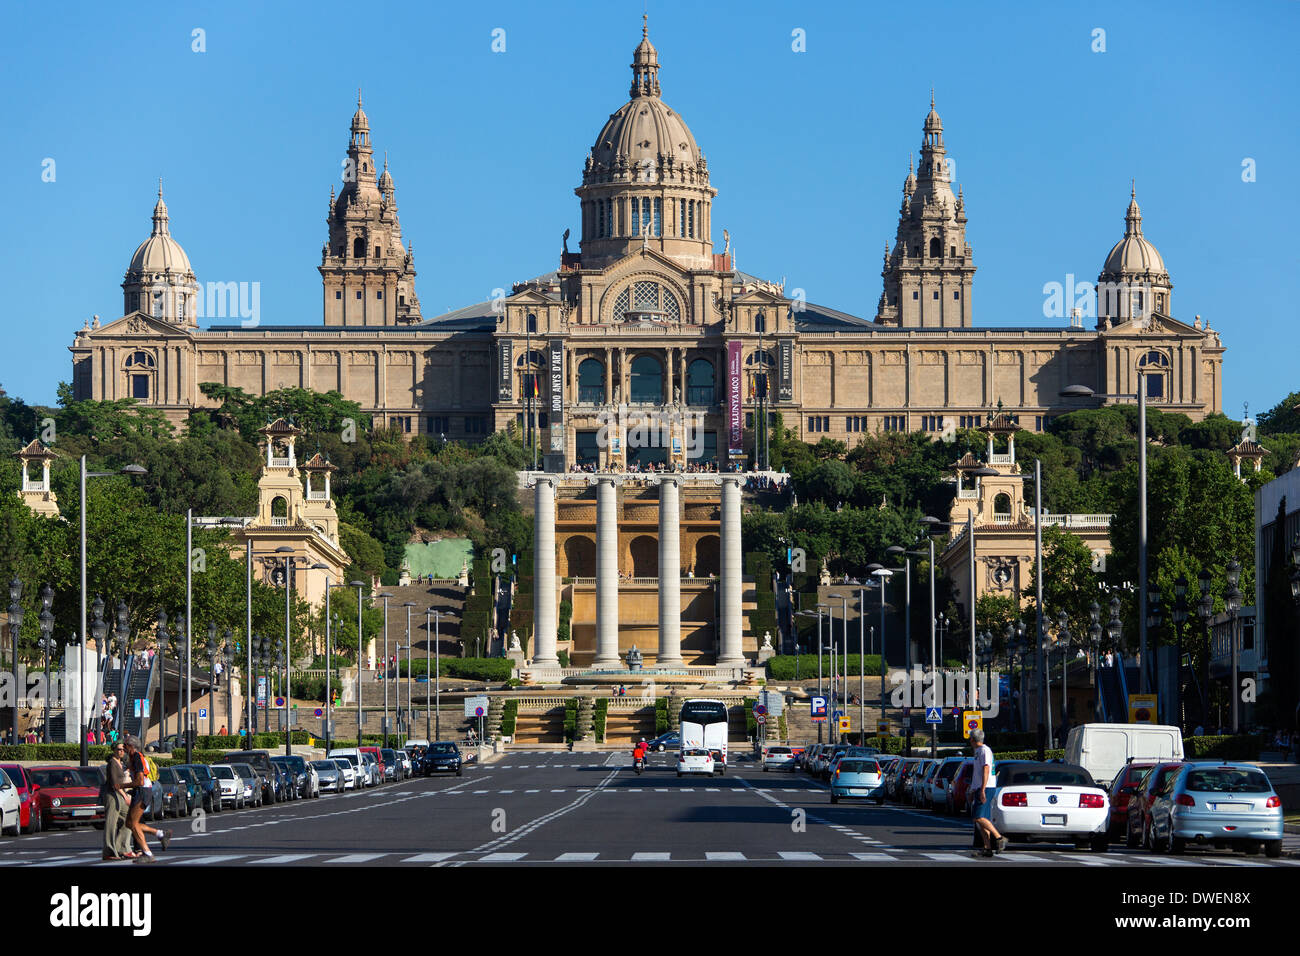 The National Palace (Museu National d'Art de Catalunya) in the Montjuic district of Barcelona in the Catalonia region of Spain. Stock Photo